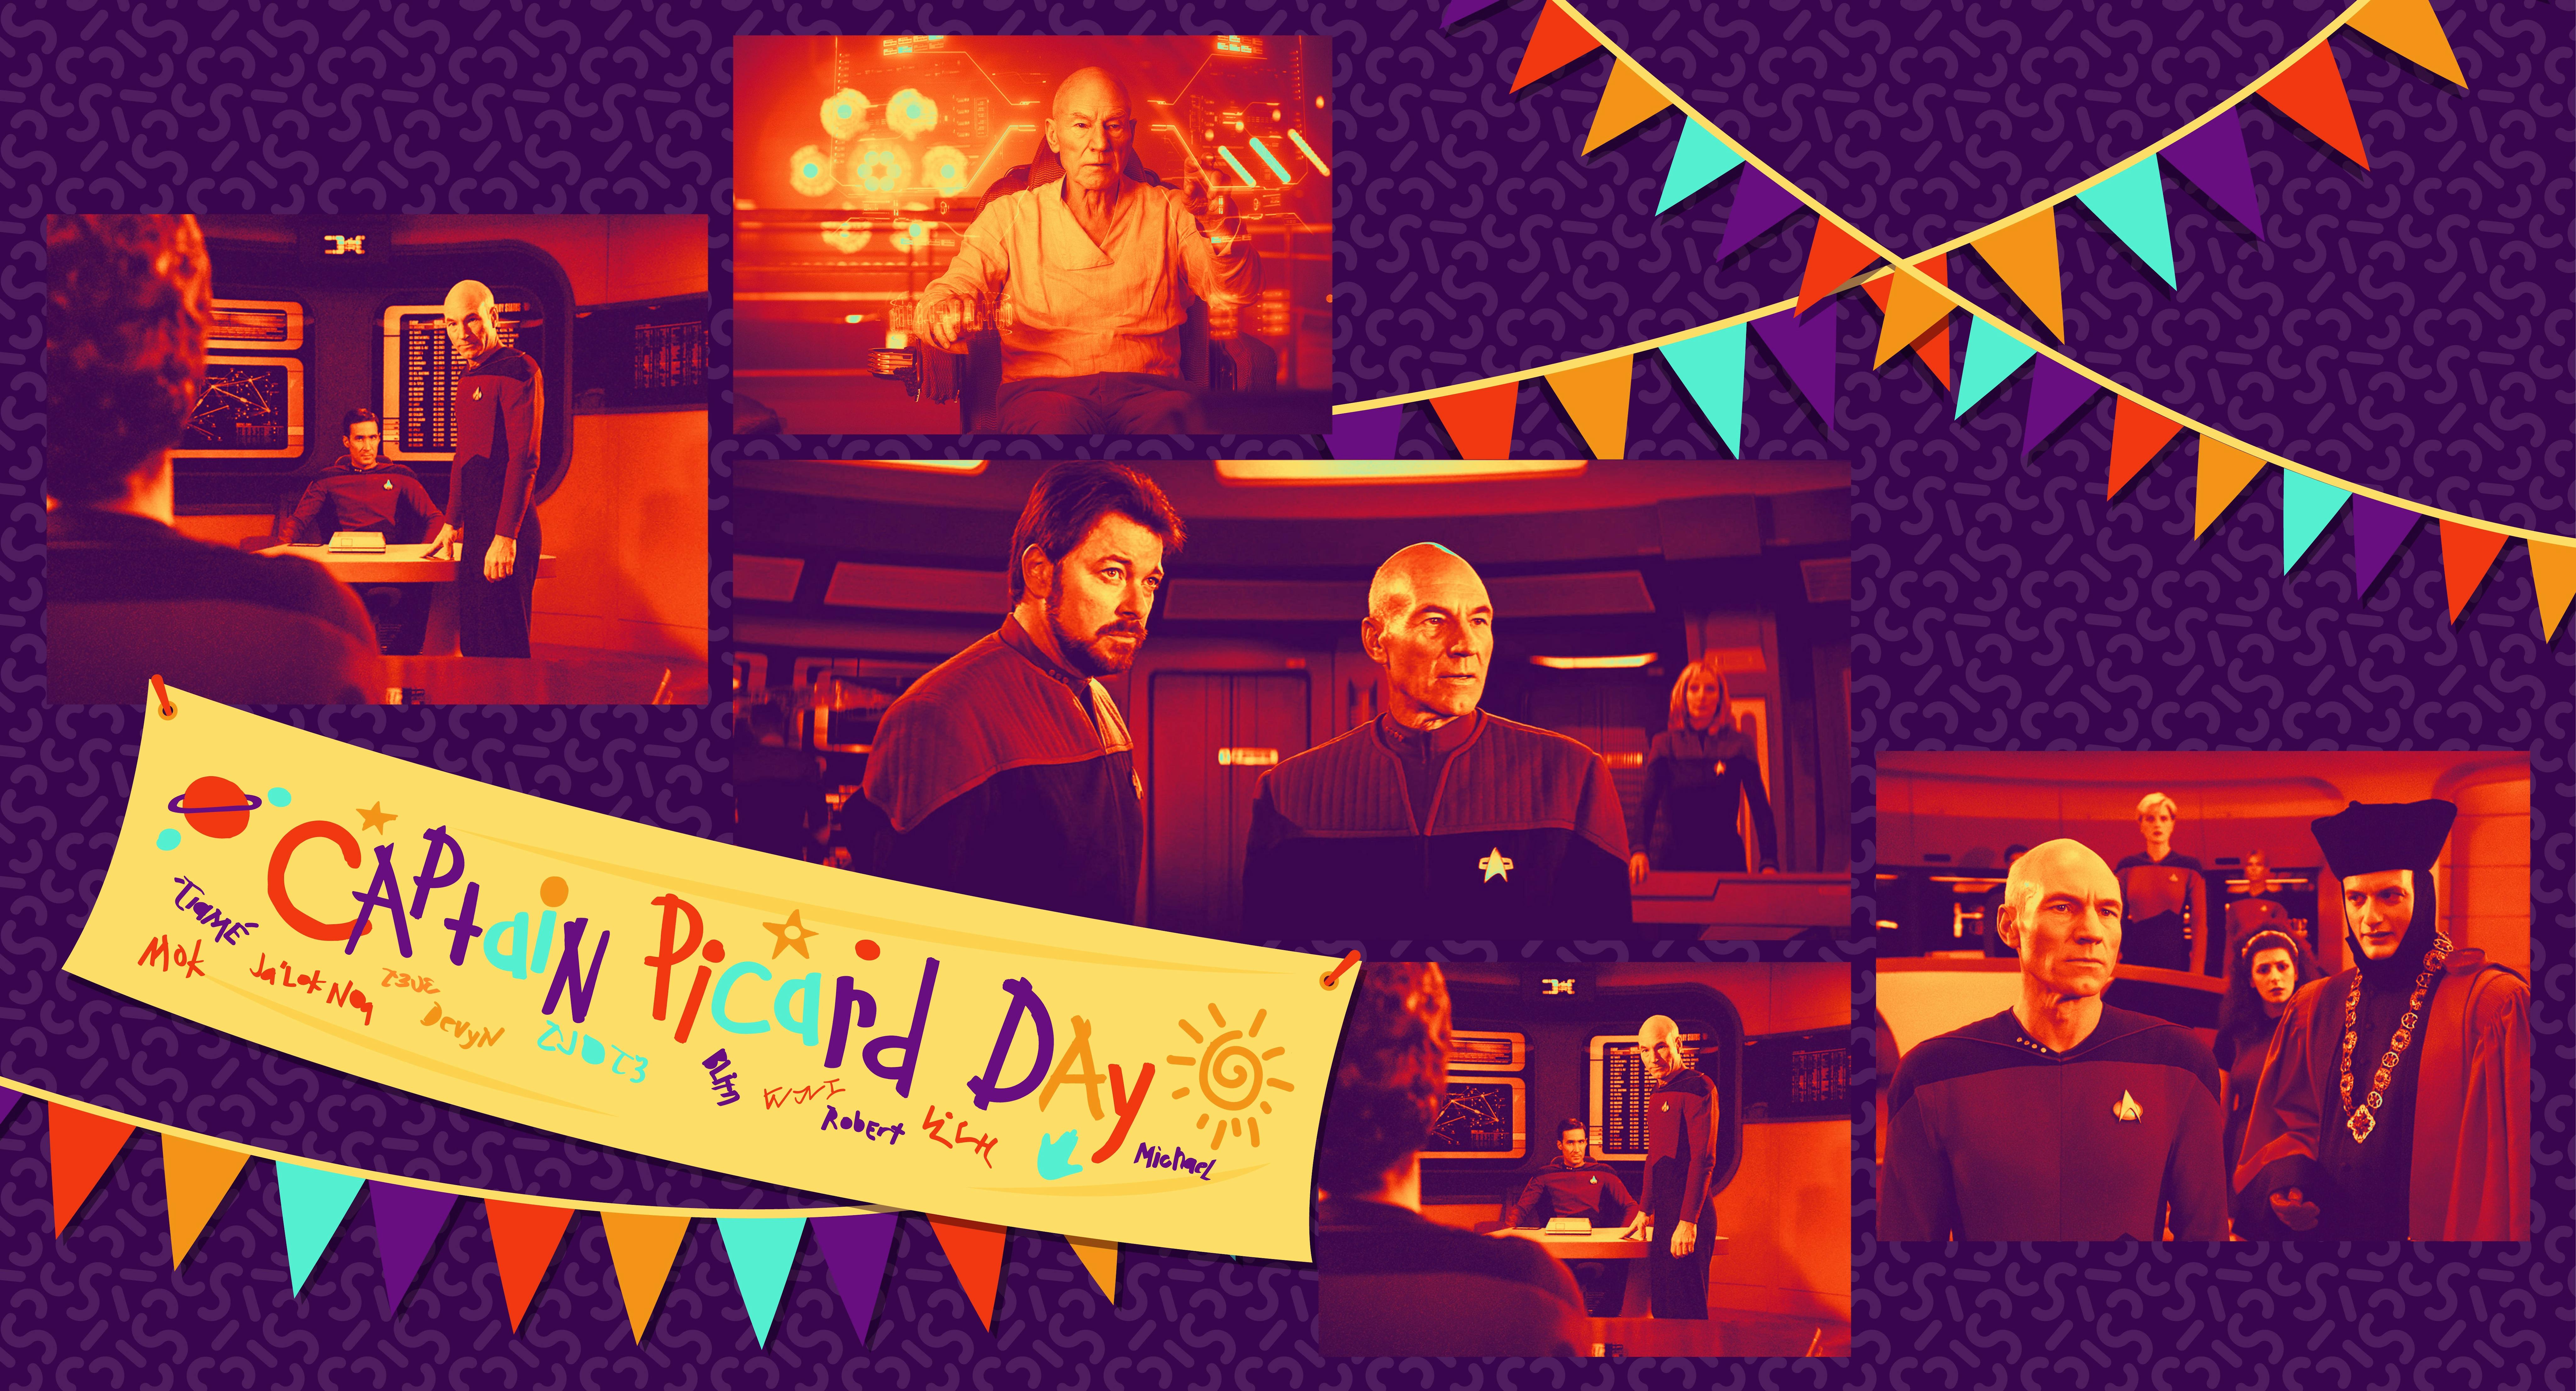 A collage of images of Jean-Luc Picard are against a purple background. A banner reading "Captain Picard Day" is in the lower left corner.